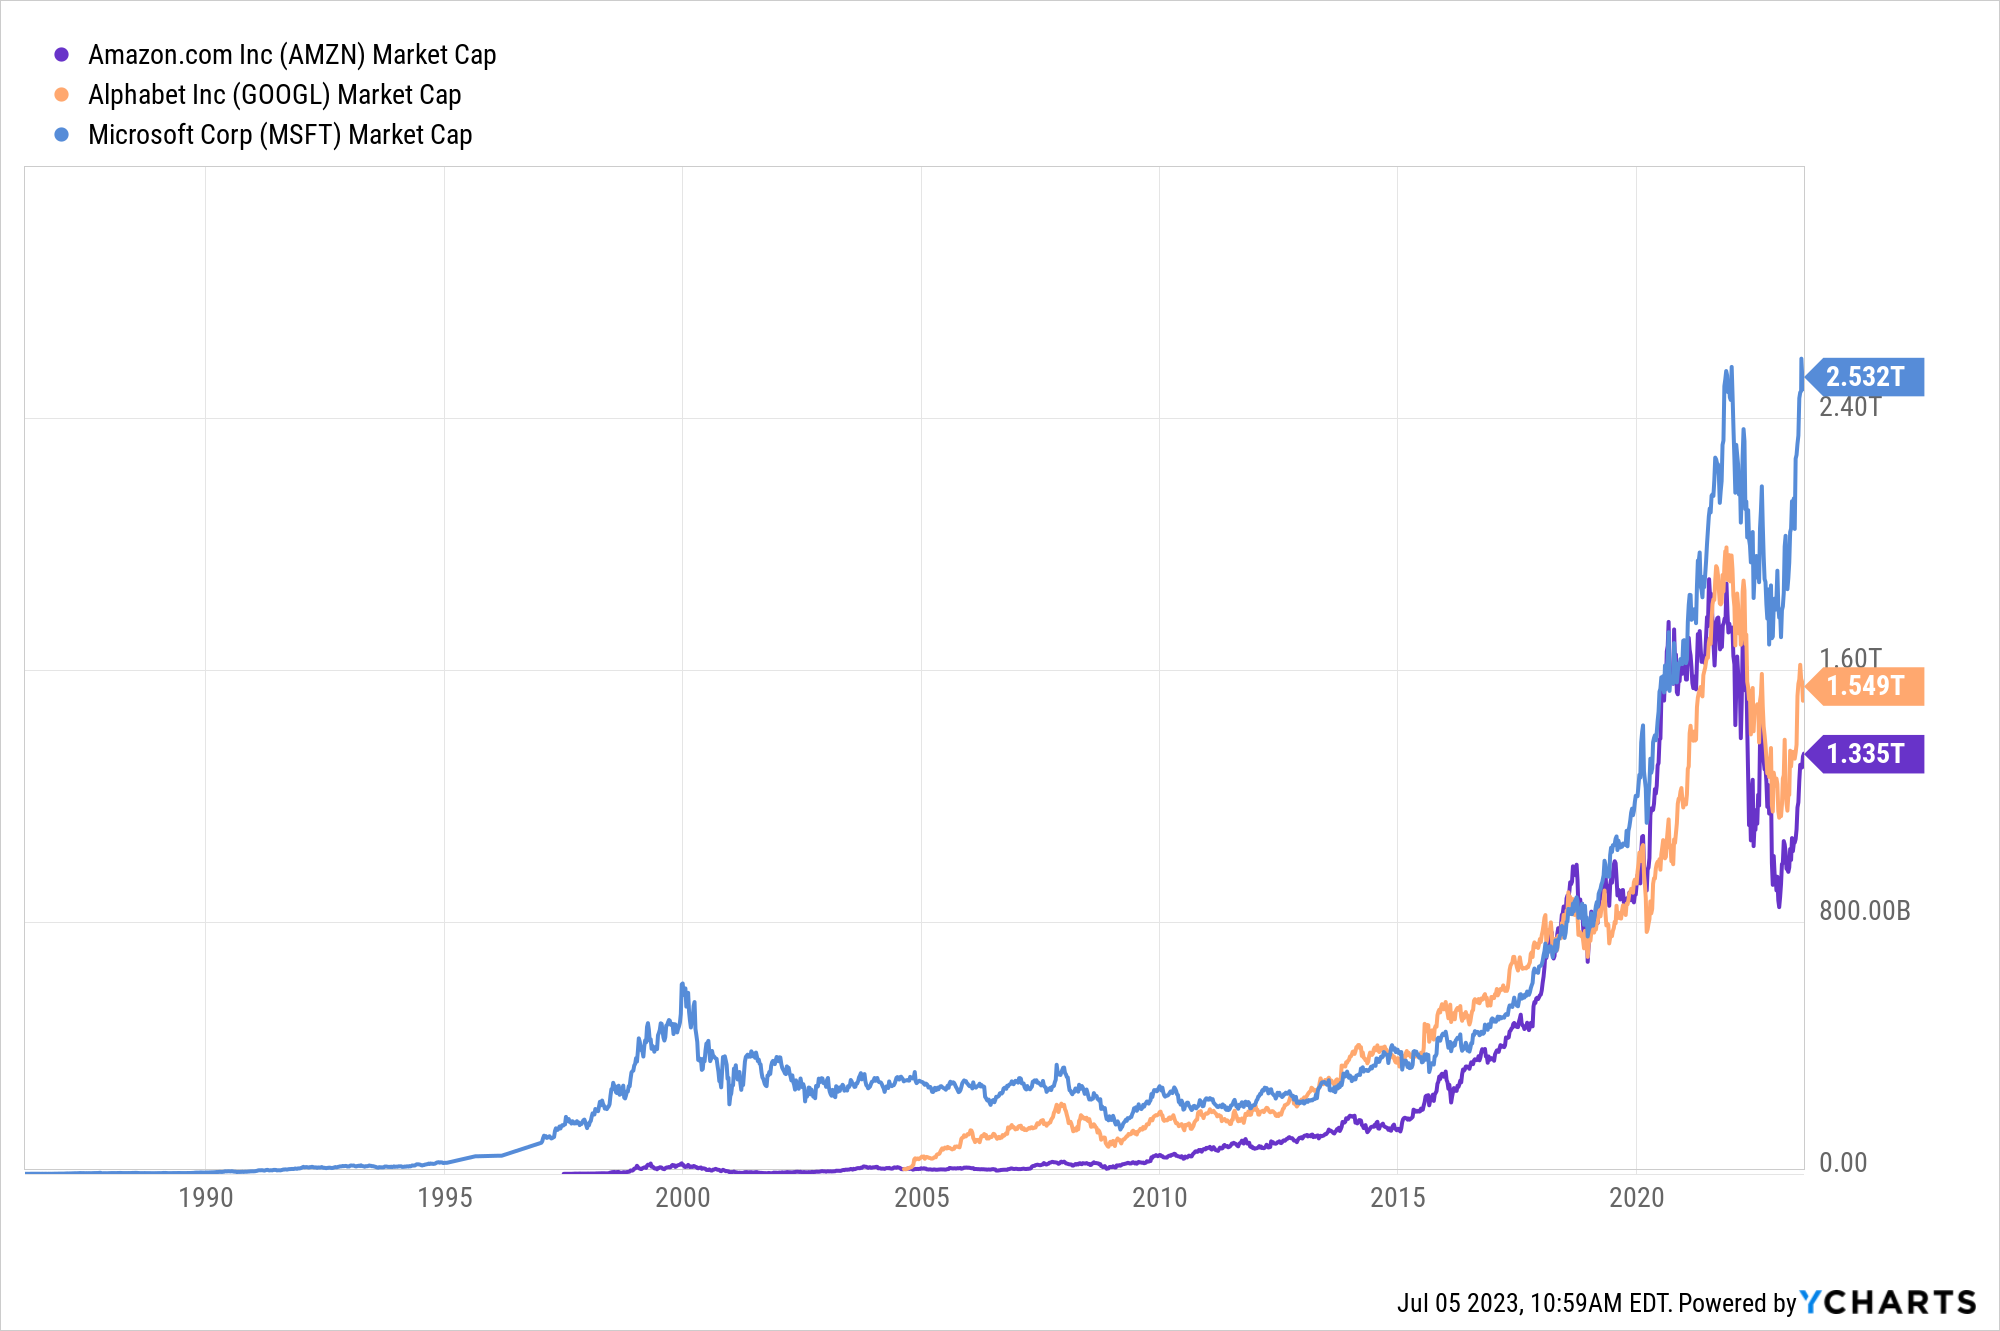 A graph showing the change in AMZN, GOOGL, and MSFT stock's market cap over time